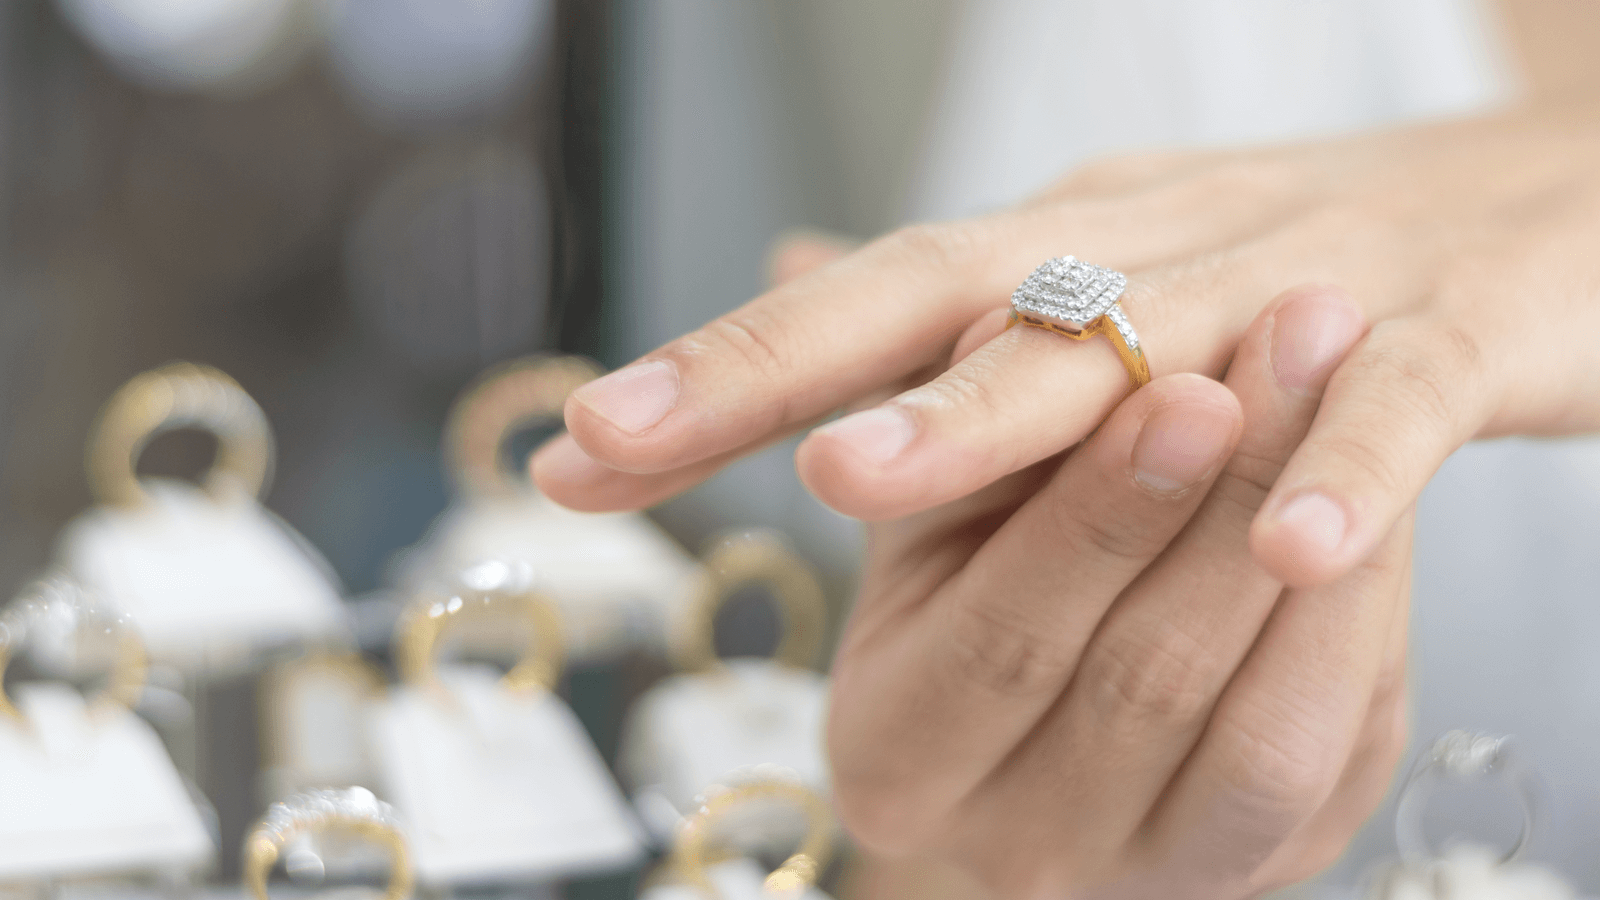 Hand of woman customer trying diamond gold ring for wedding, engagement ring shopping concept